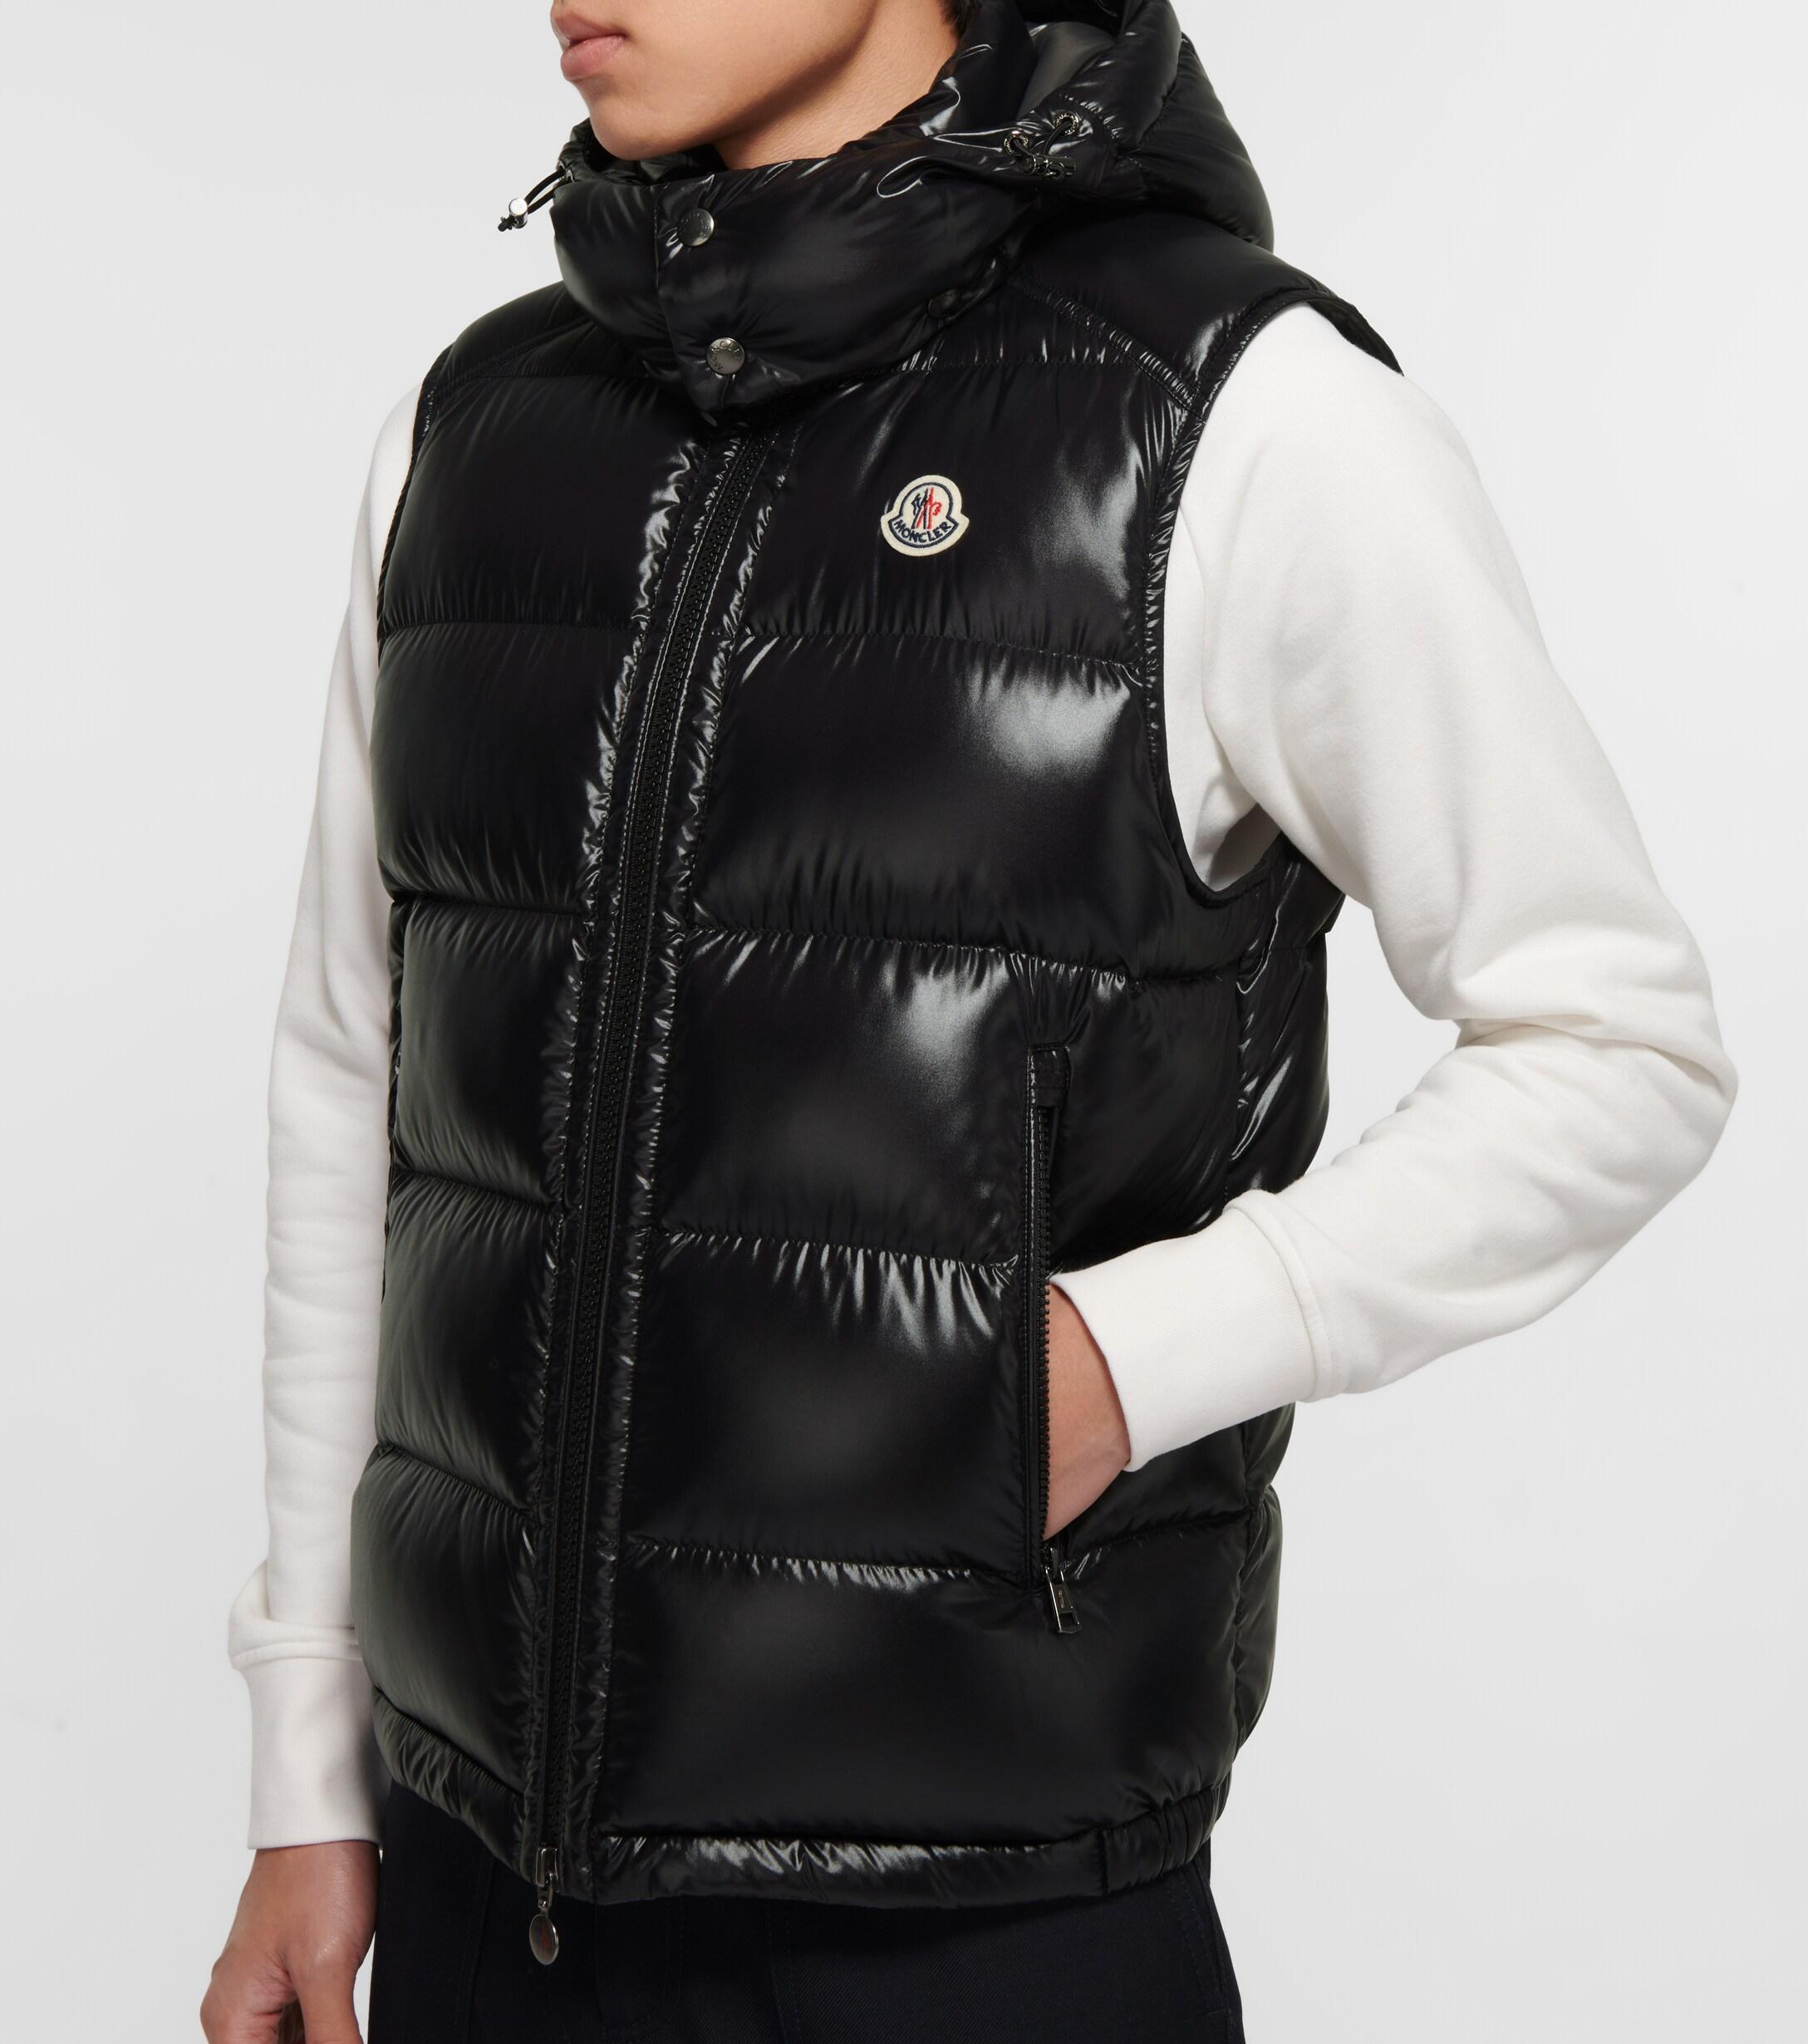 moncler vest with hood,OFF 61%,www.concordehotels.com.tr